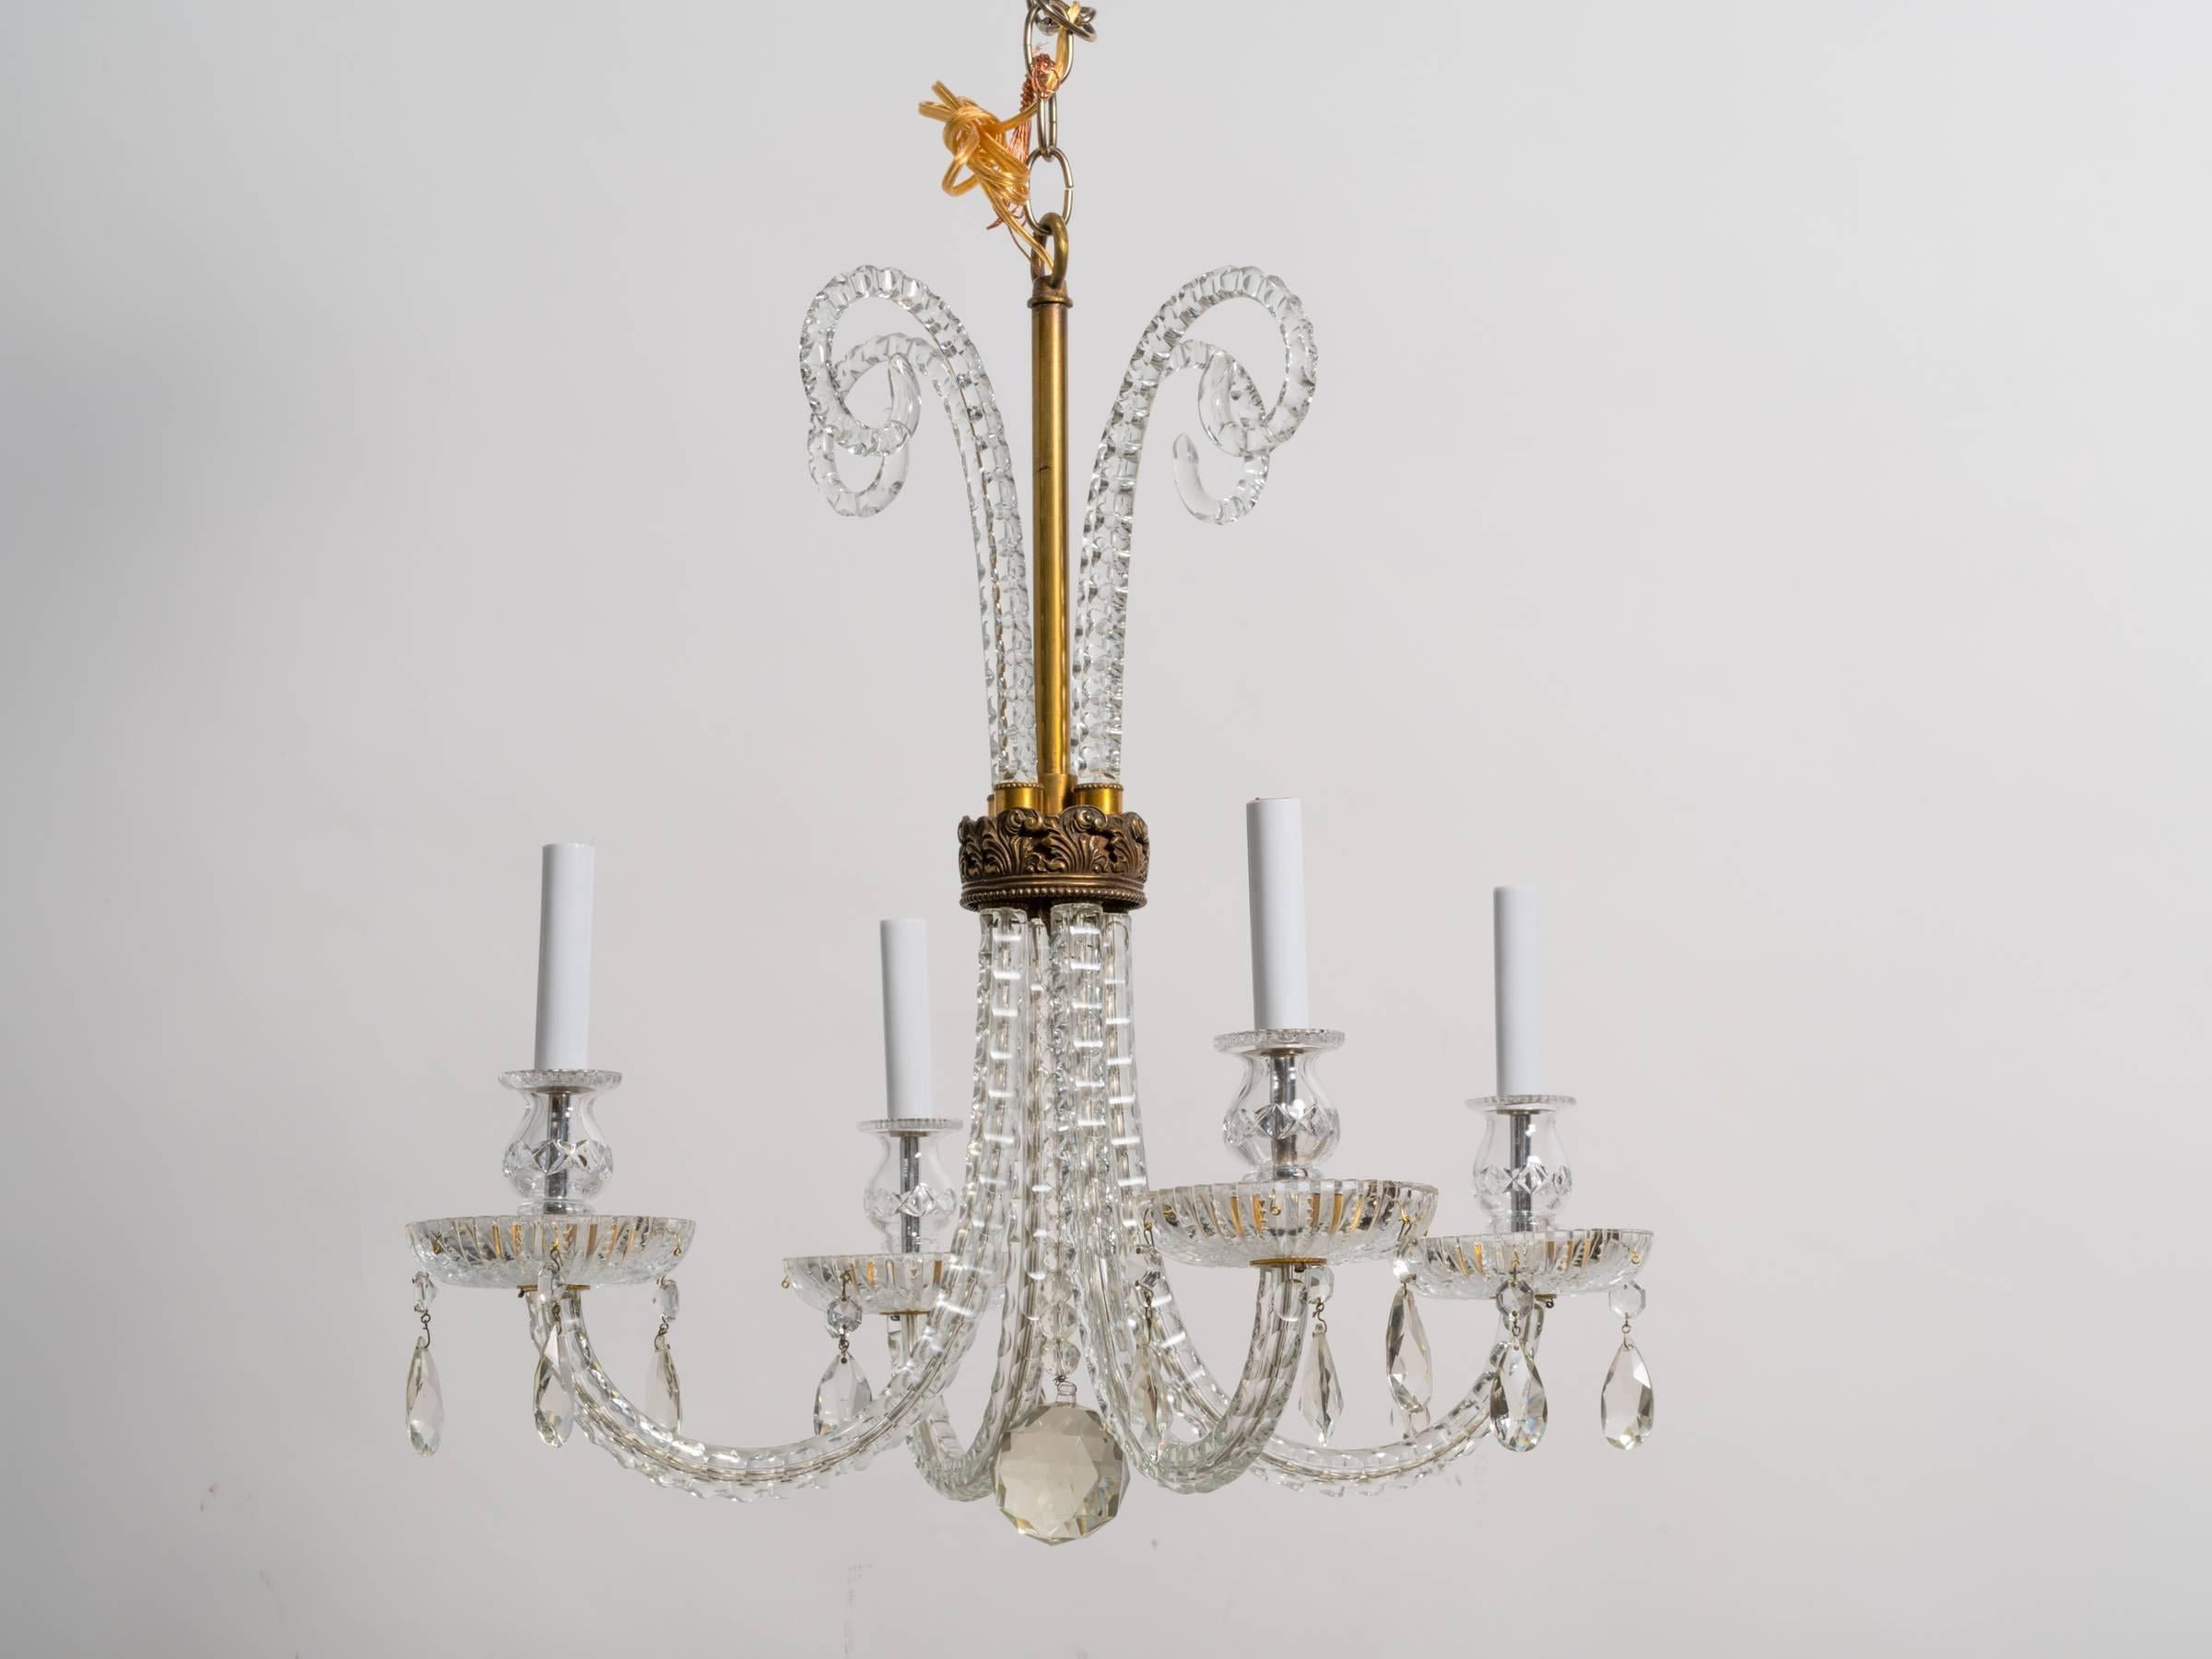 1930s Crystal Plume Chandelier In Good Condition For Sale In Tarrytown, NY